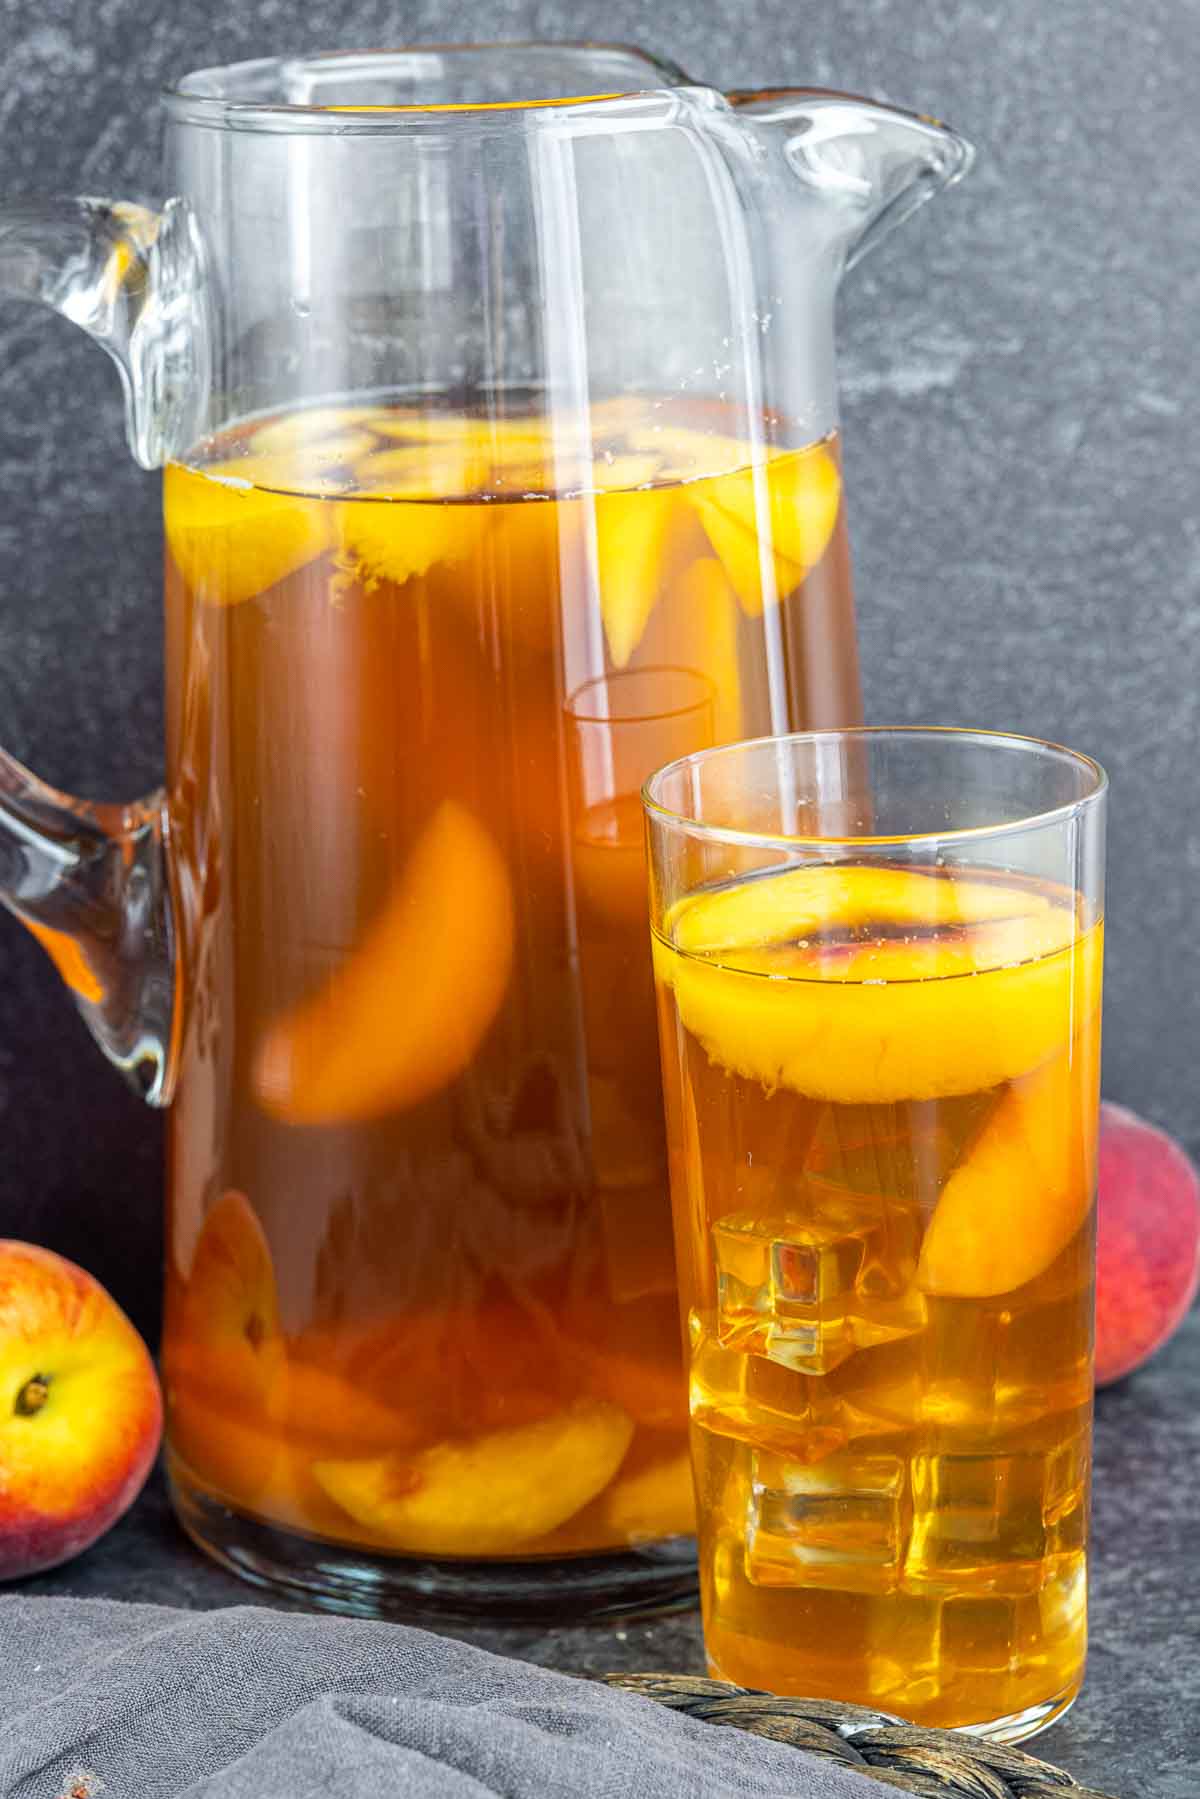 pitcher and glass of Peach Iced Tea